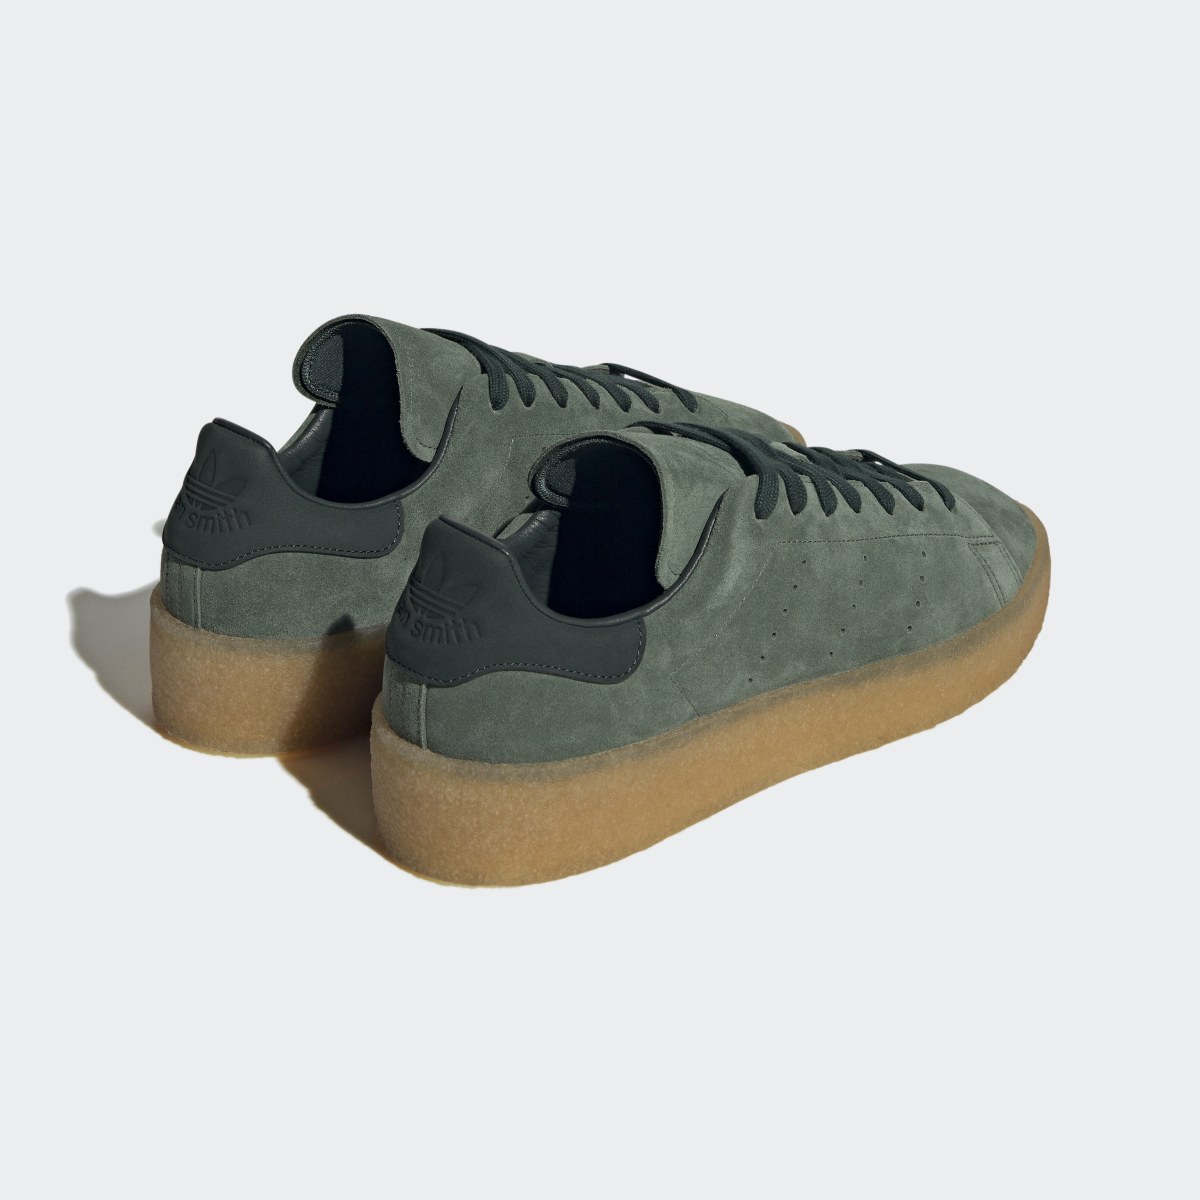 Adidas Stan Smith Crepe Shoes. 6